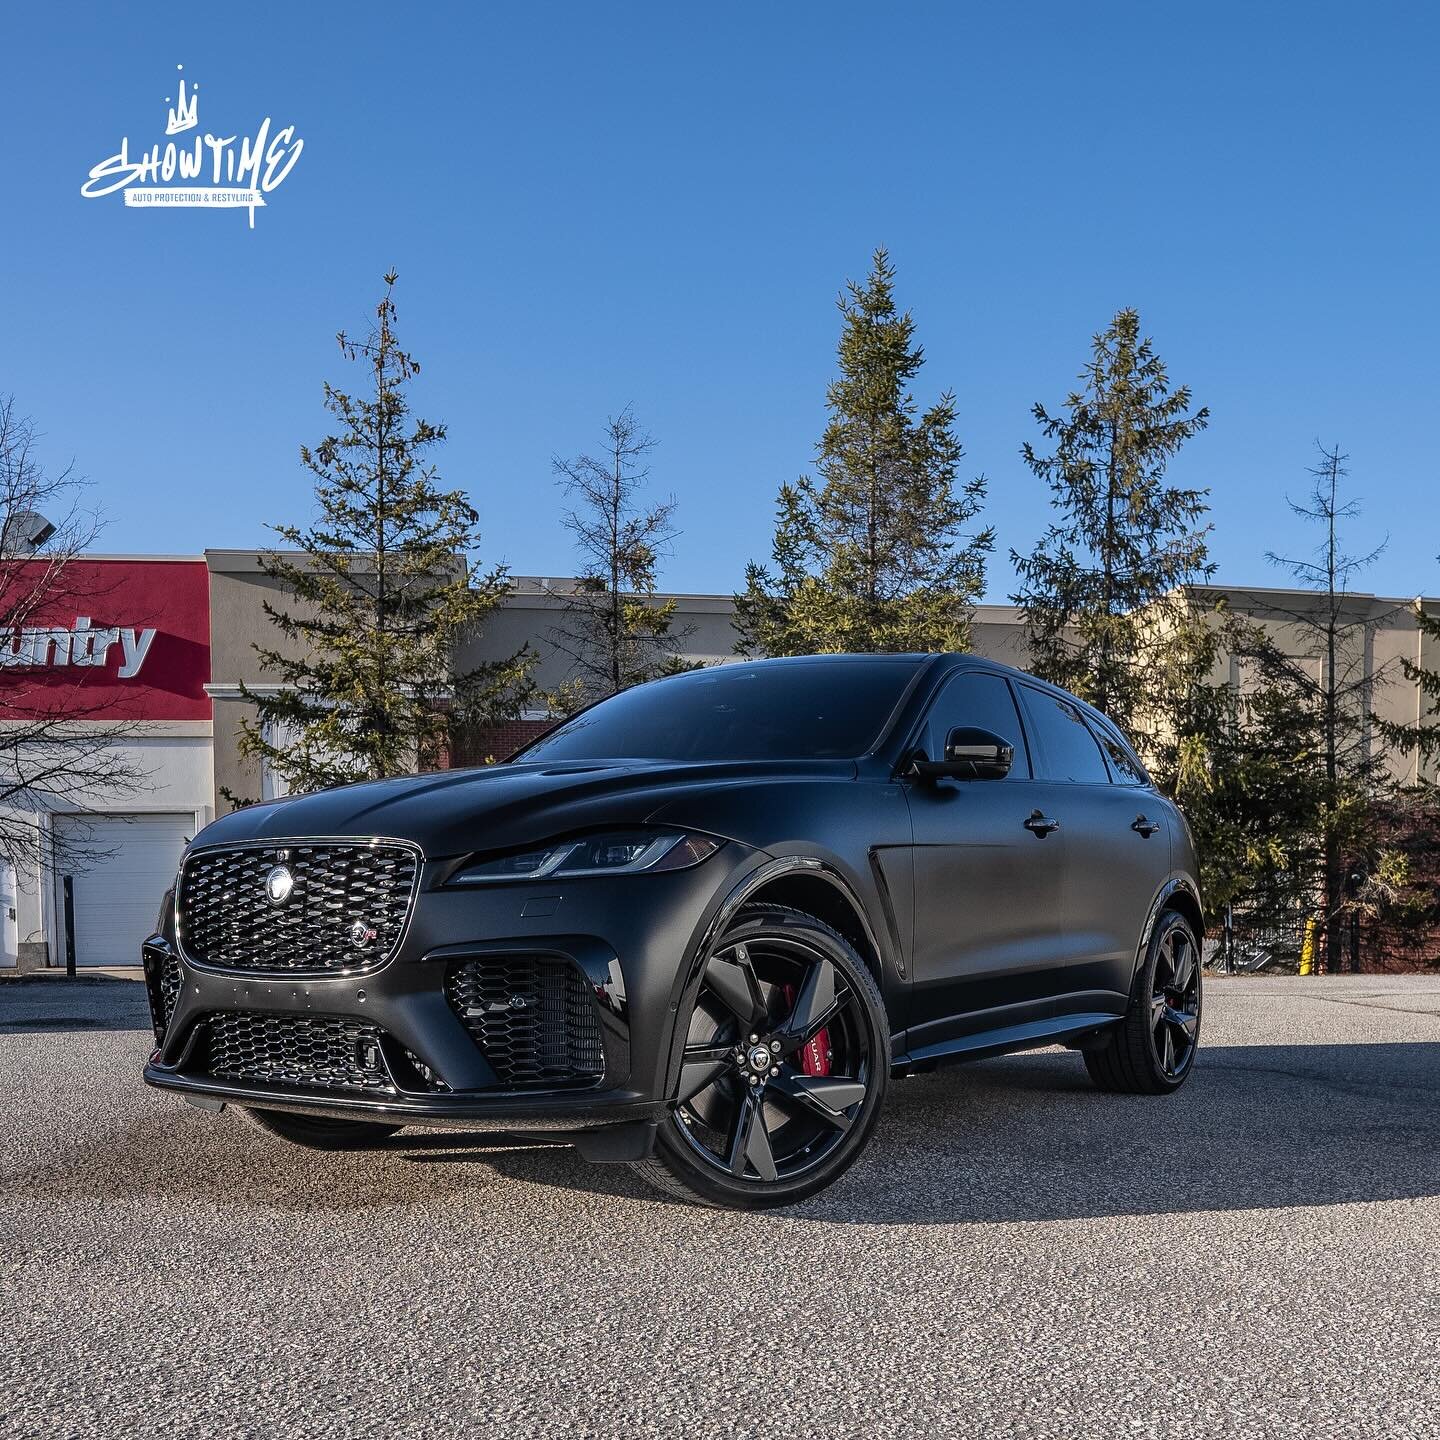 Jaguar F-Pace SVR Makeover Complete❗️

▪️3M Satin Black Wrap
▫️Suntek 35% Windshield 
▪️Layer Of Feynlab Ceramic Vinyl 
▫️Tinted PPF On Both Headlights &amp; Taillights 
▪️Feynlab Ceramic Wheel And Caliper On All Rims 

Interested In A Complete Colou